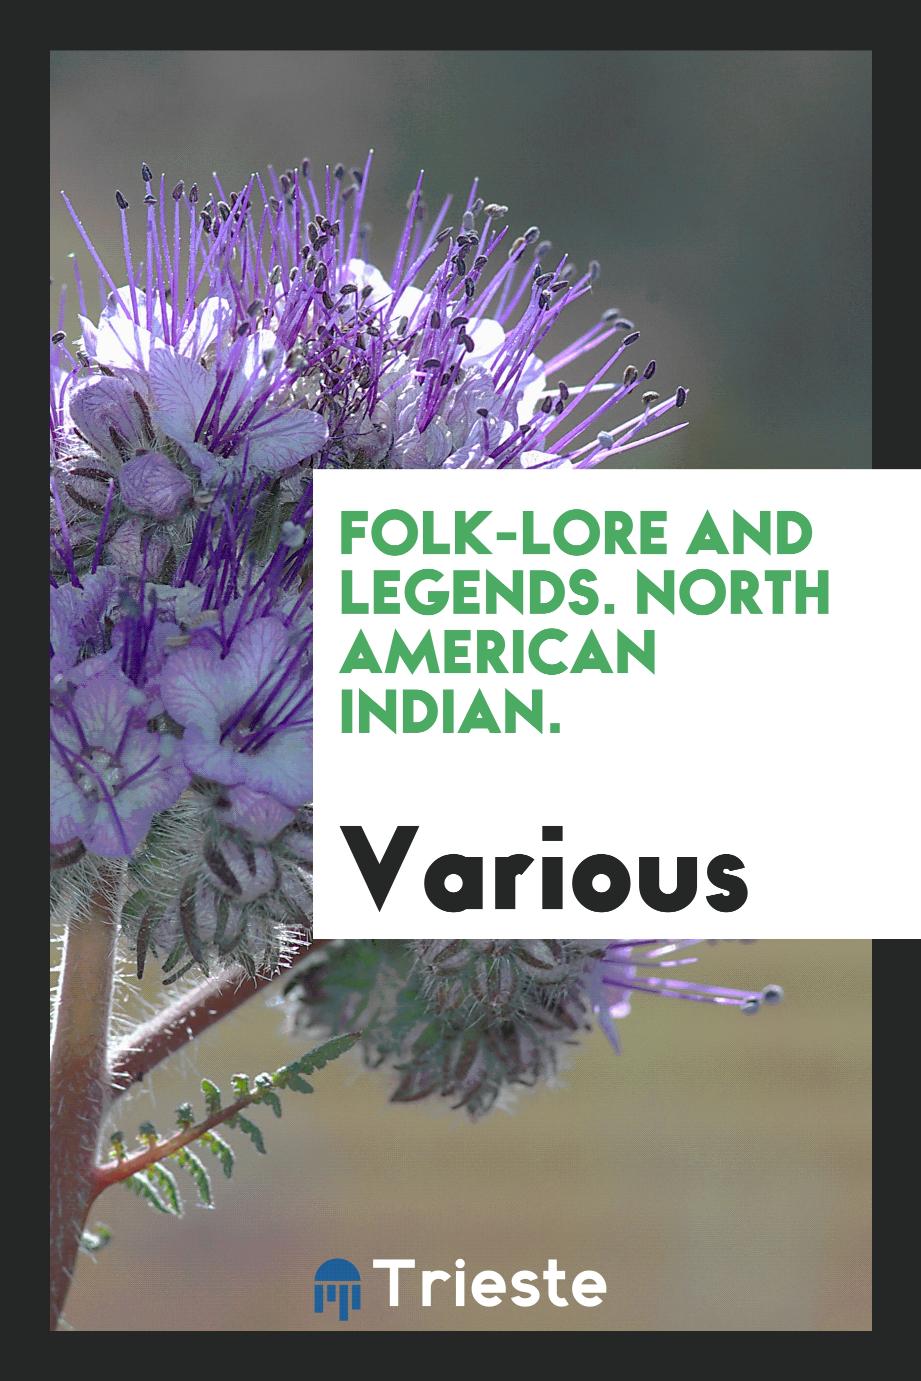 Folk-lore and legends. North American Indian.